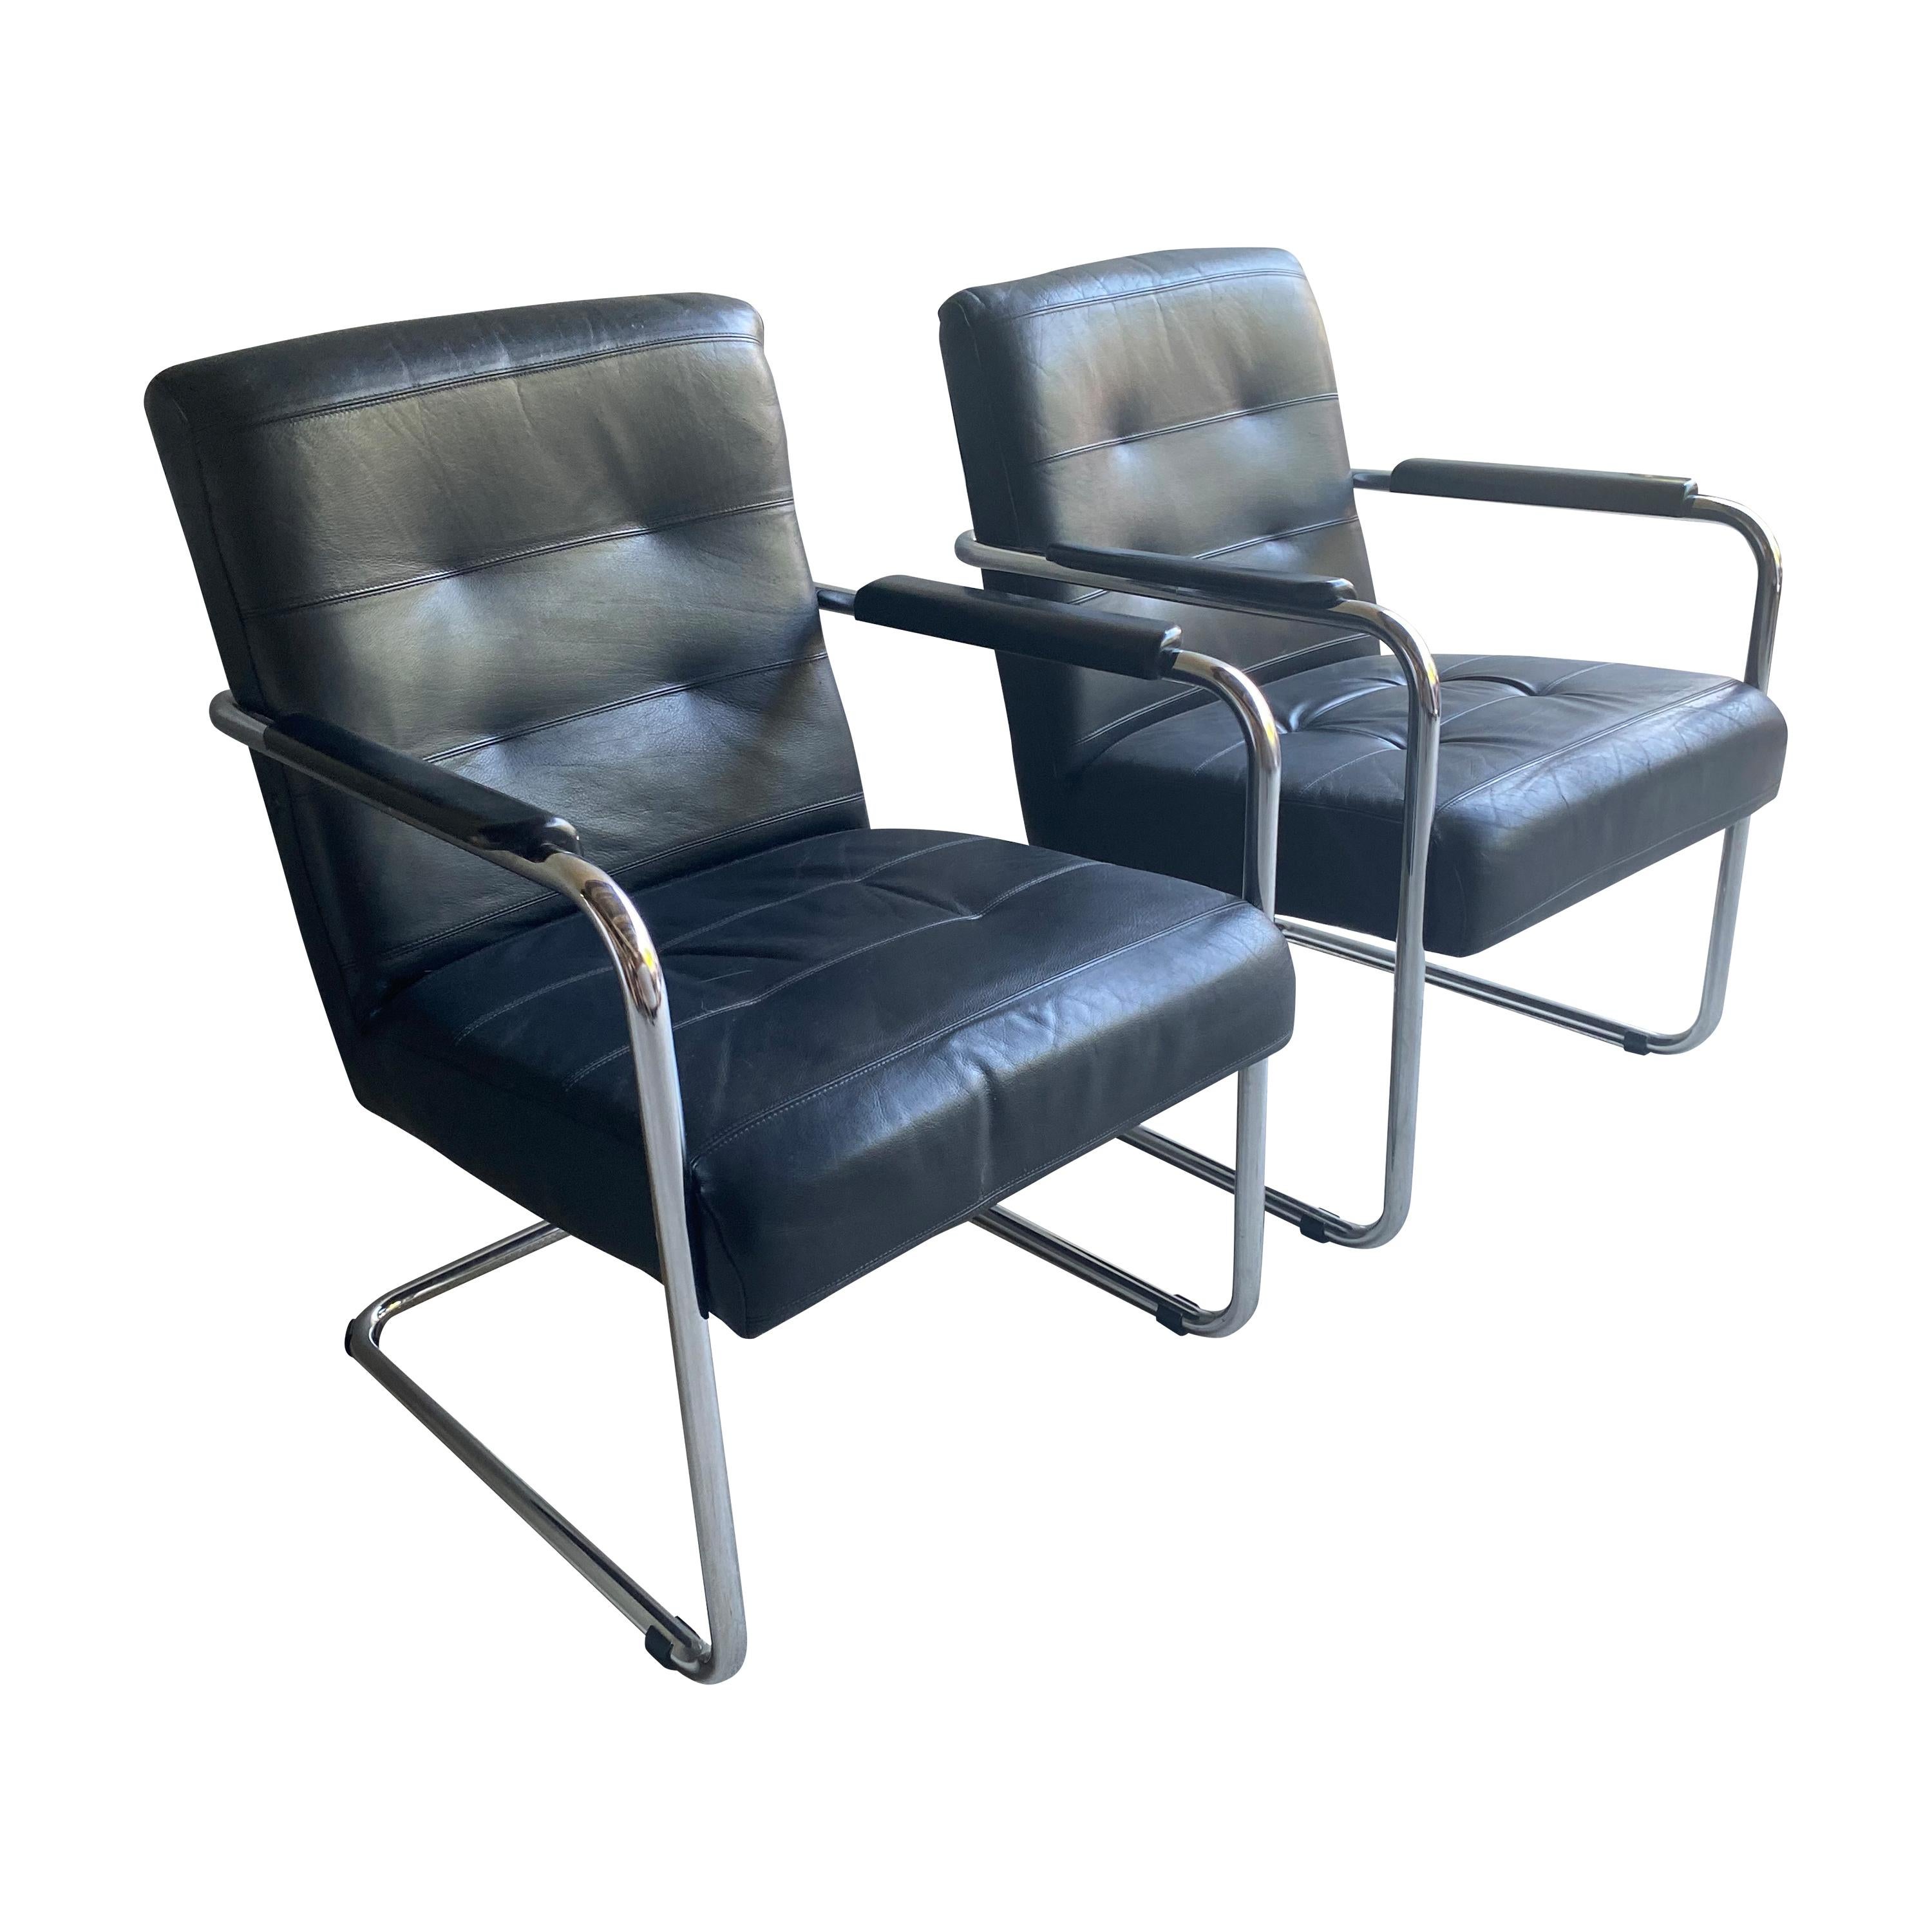 European classic modern armchair in black leather and tubular chrome.  Comfortable with generous scale and slight bounce as a result of the cantilevered design. 1970-80's.  Two available, sold separately.